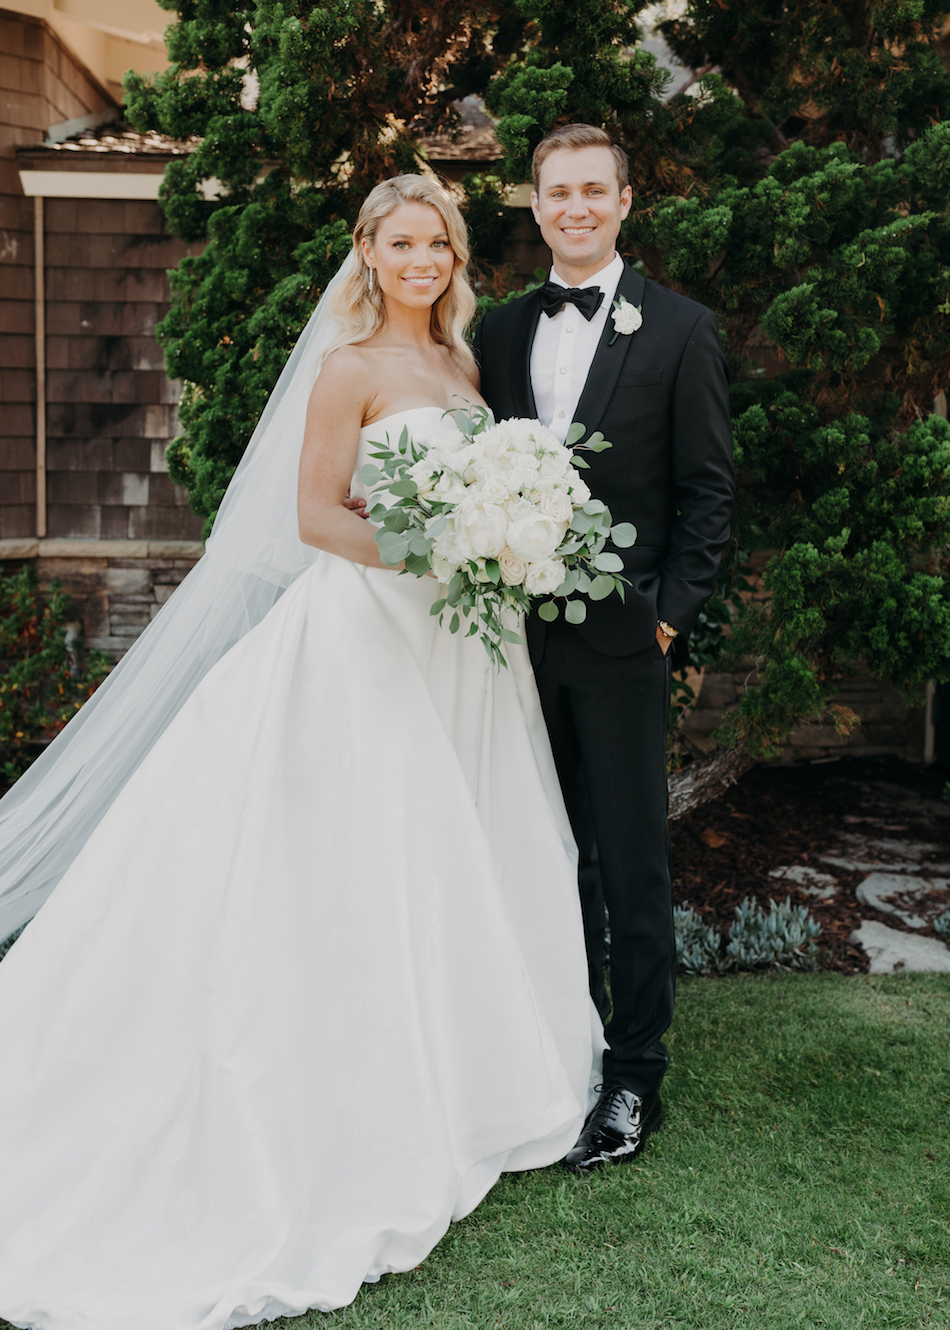 bride and groom, newlyweds, wedding day, floral design, florist, wedding florist, wedding flowers, orange county weddings, orange county wedding florist, orange county florist, orange county floral design, flowers by cina